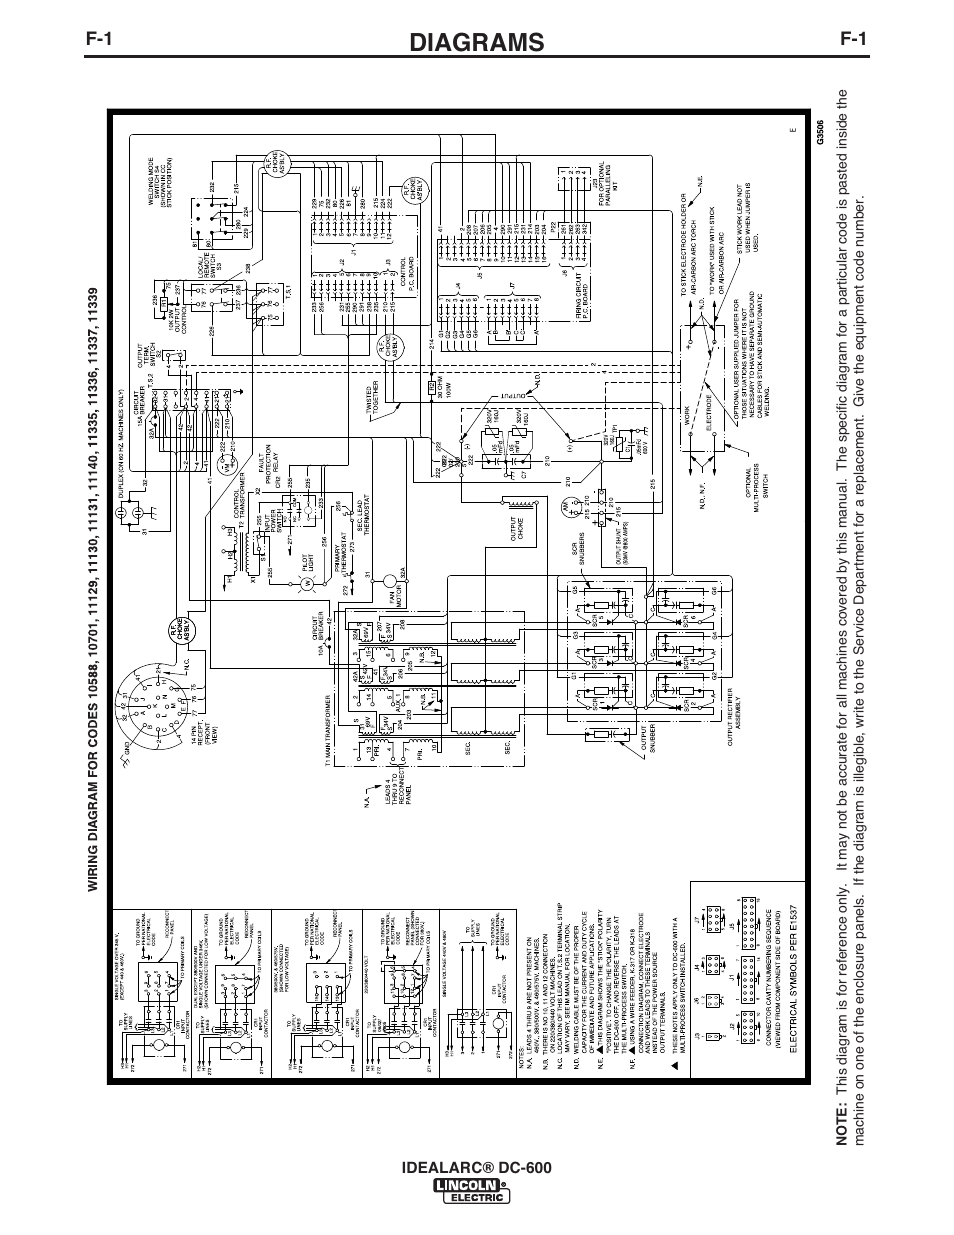 Diagrams | Lincoln Electric IM642 IDEALARC DC-600 User Manual | Page 42